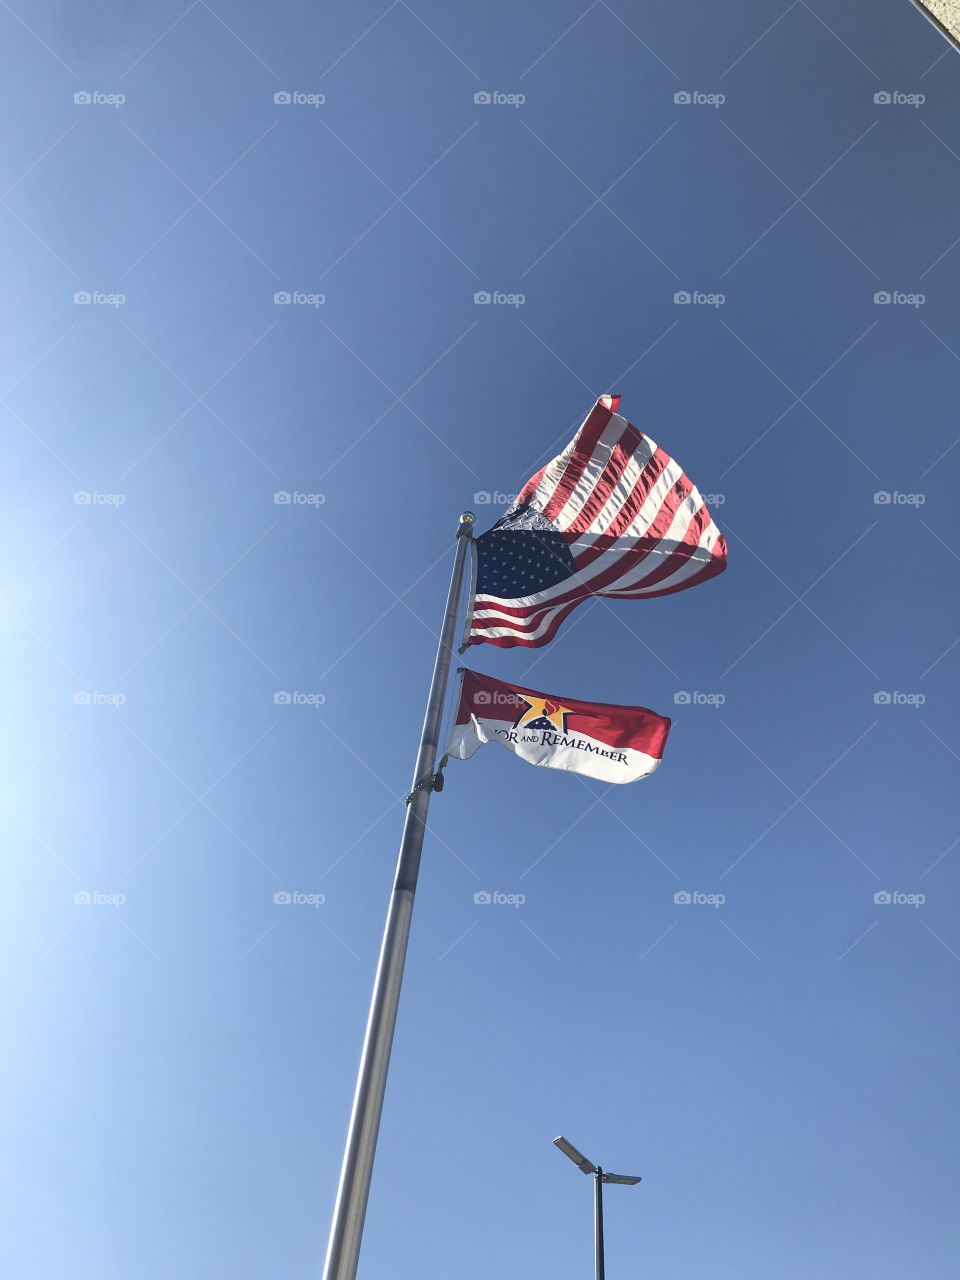 American flag & veteran flag flying with blue sky background on 9/11